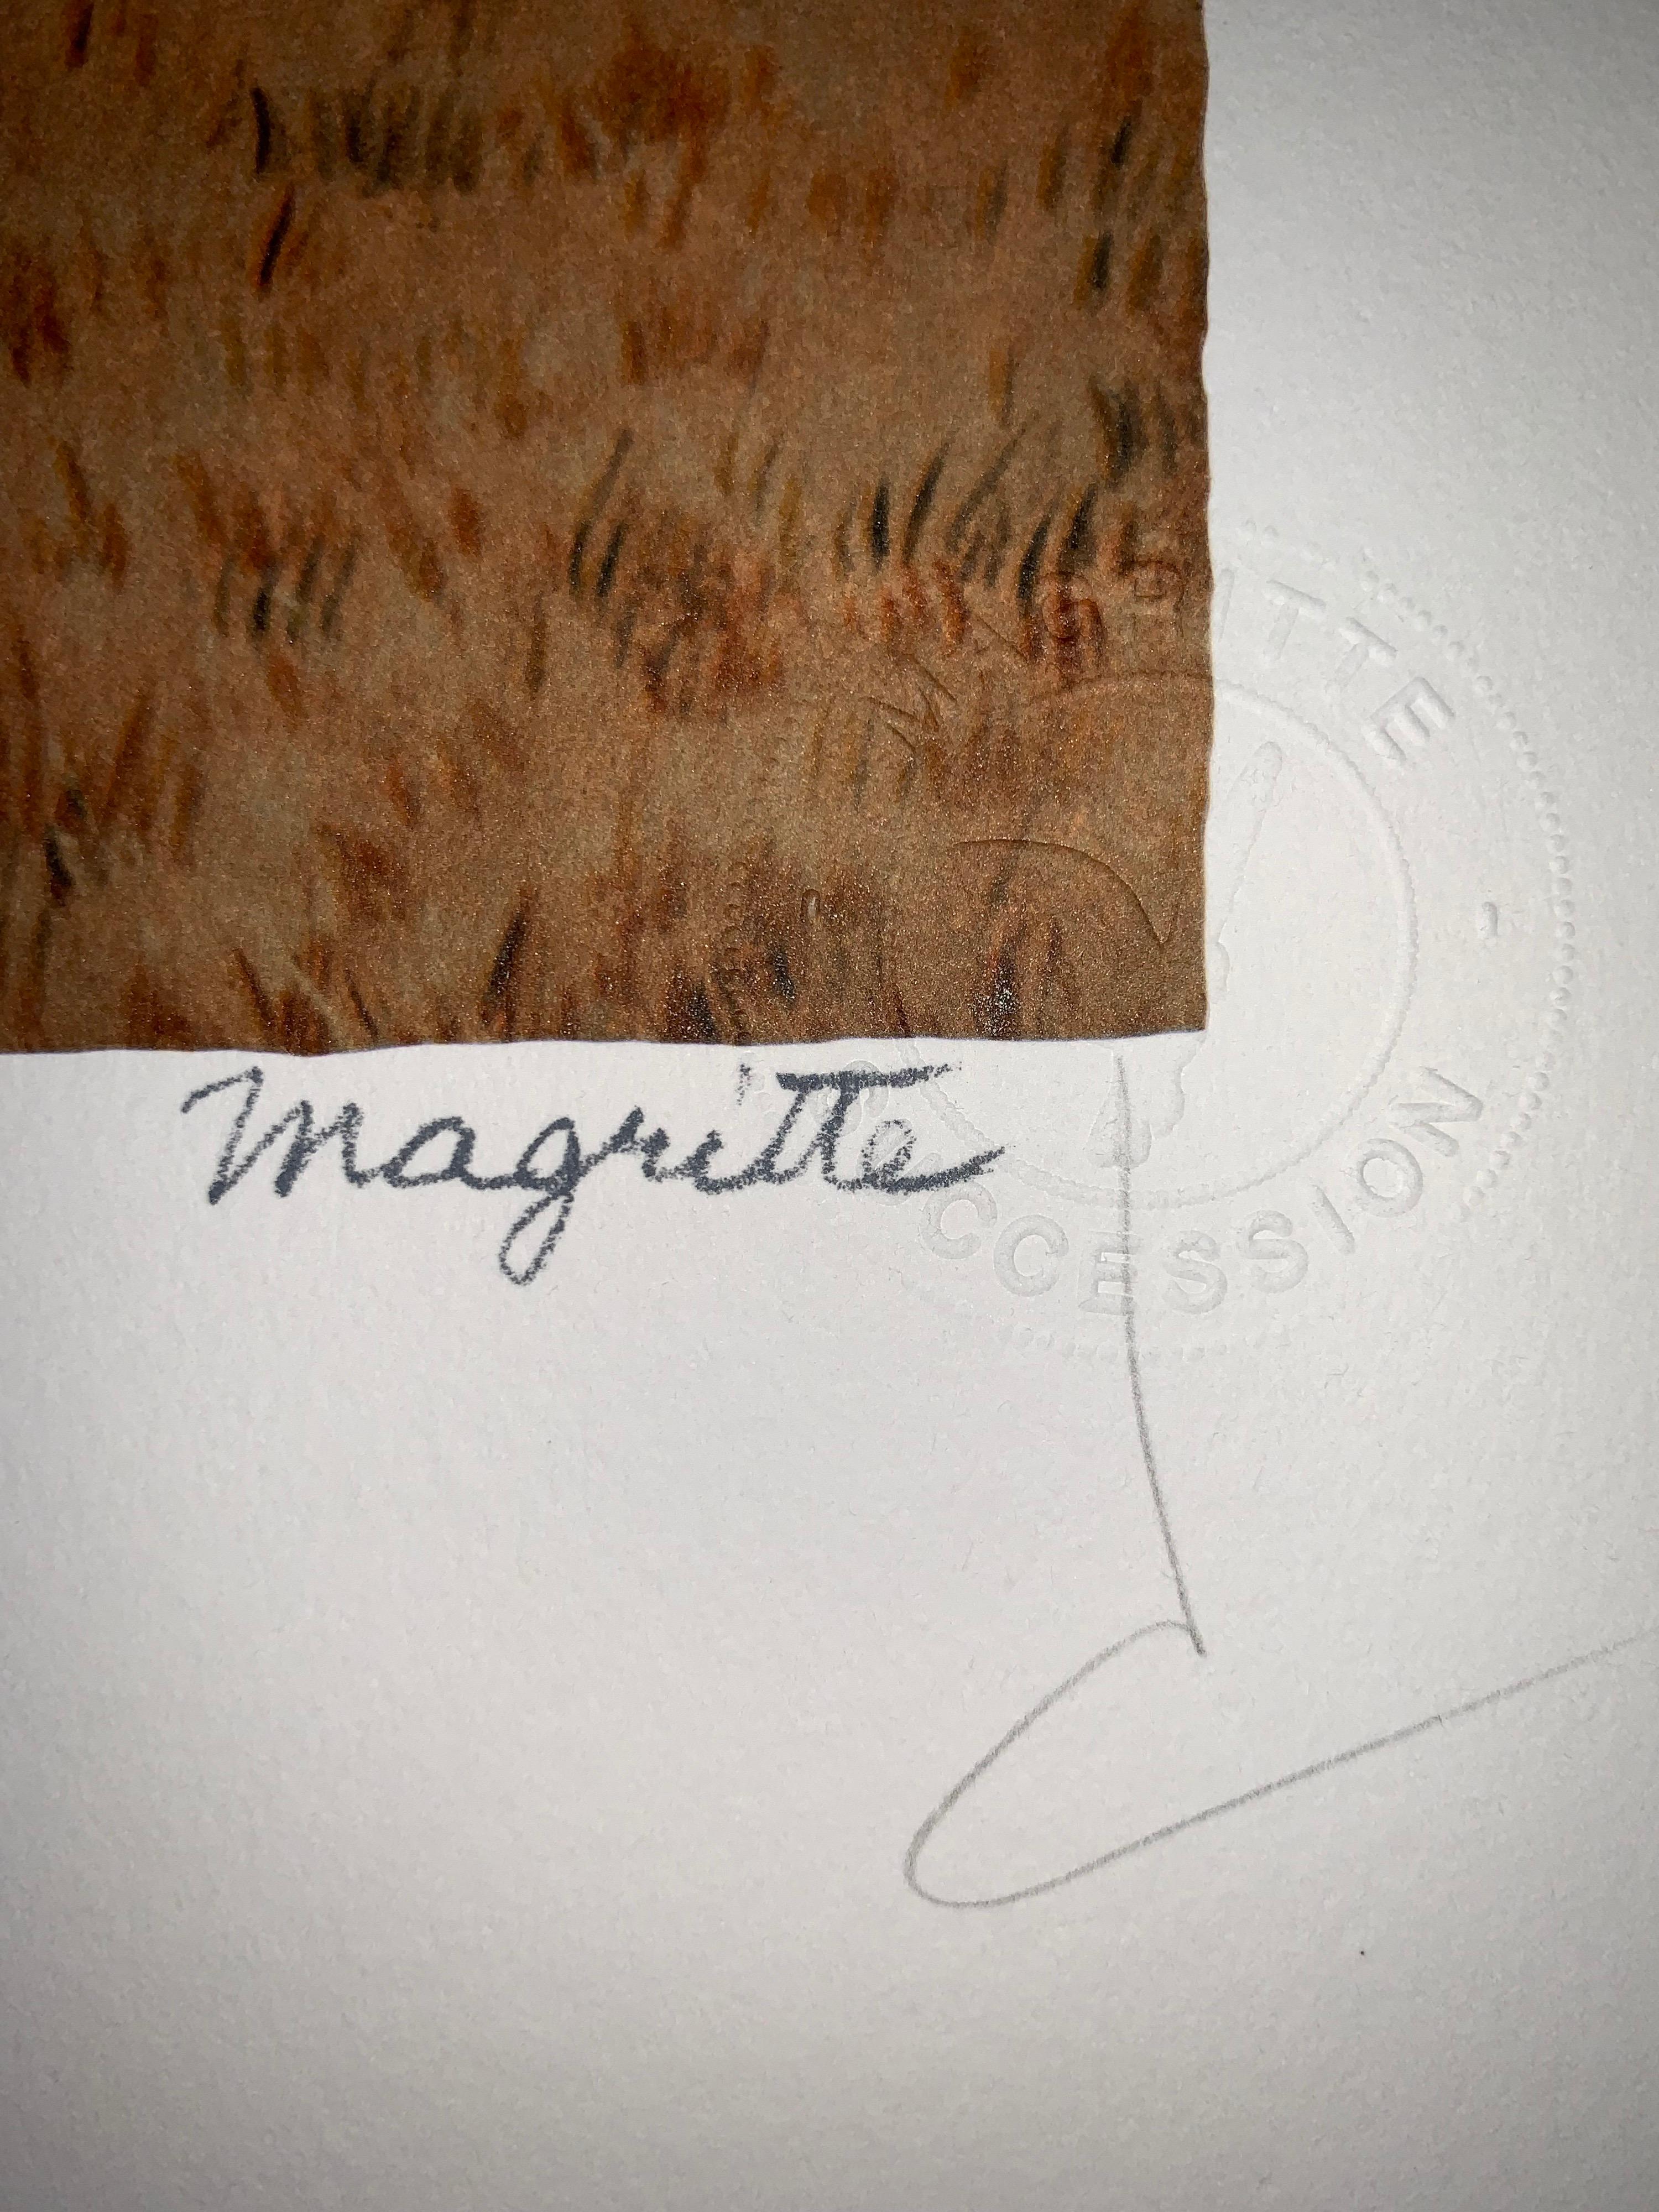 Color lithograph after the 1964 oil on canvas by René Magritte, printed signature of Magritte and numbered from the edition of 275. 
The lithograph features the dry stamps of the Magritte Foundation & ADAGP and is countersigned in pencil by Mr.